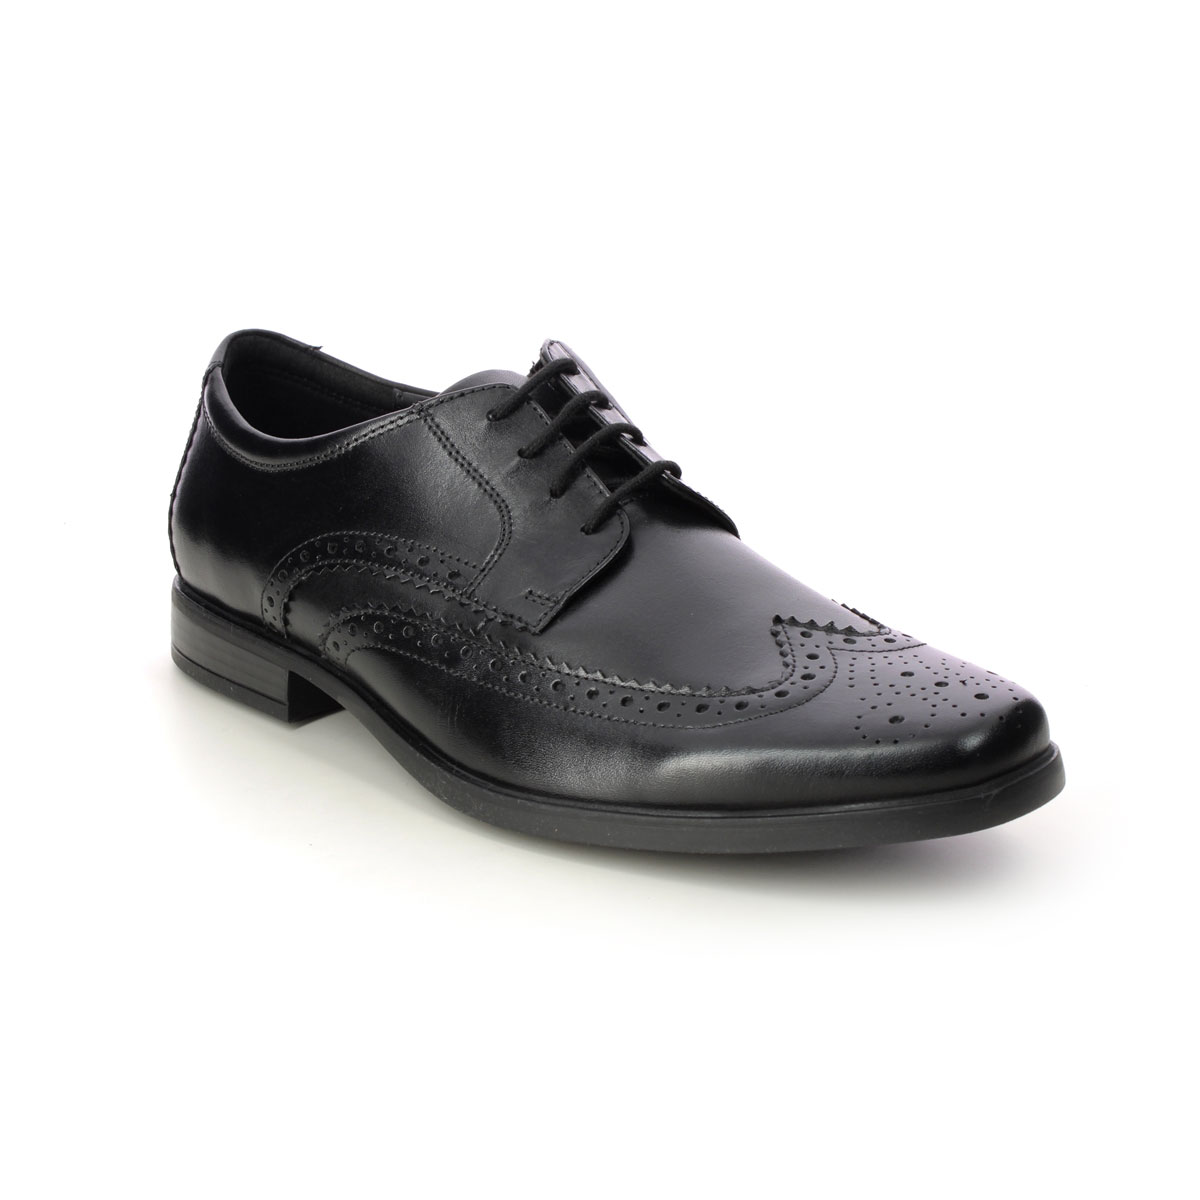 Clarks Howard Wing Black Leather Mens Brogues 612537G In Size 8 In Plain Black Leather G Width Fitting